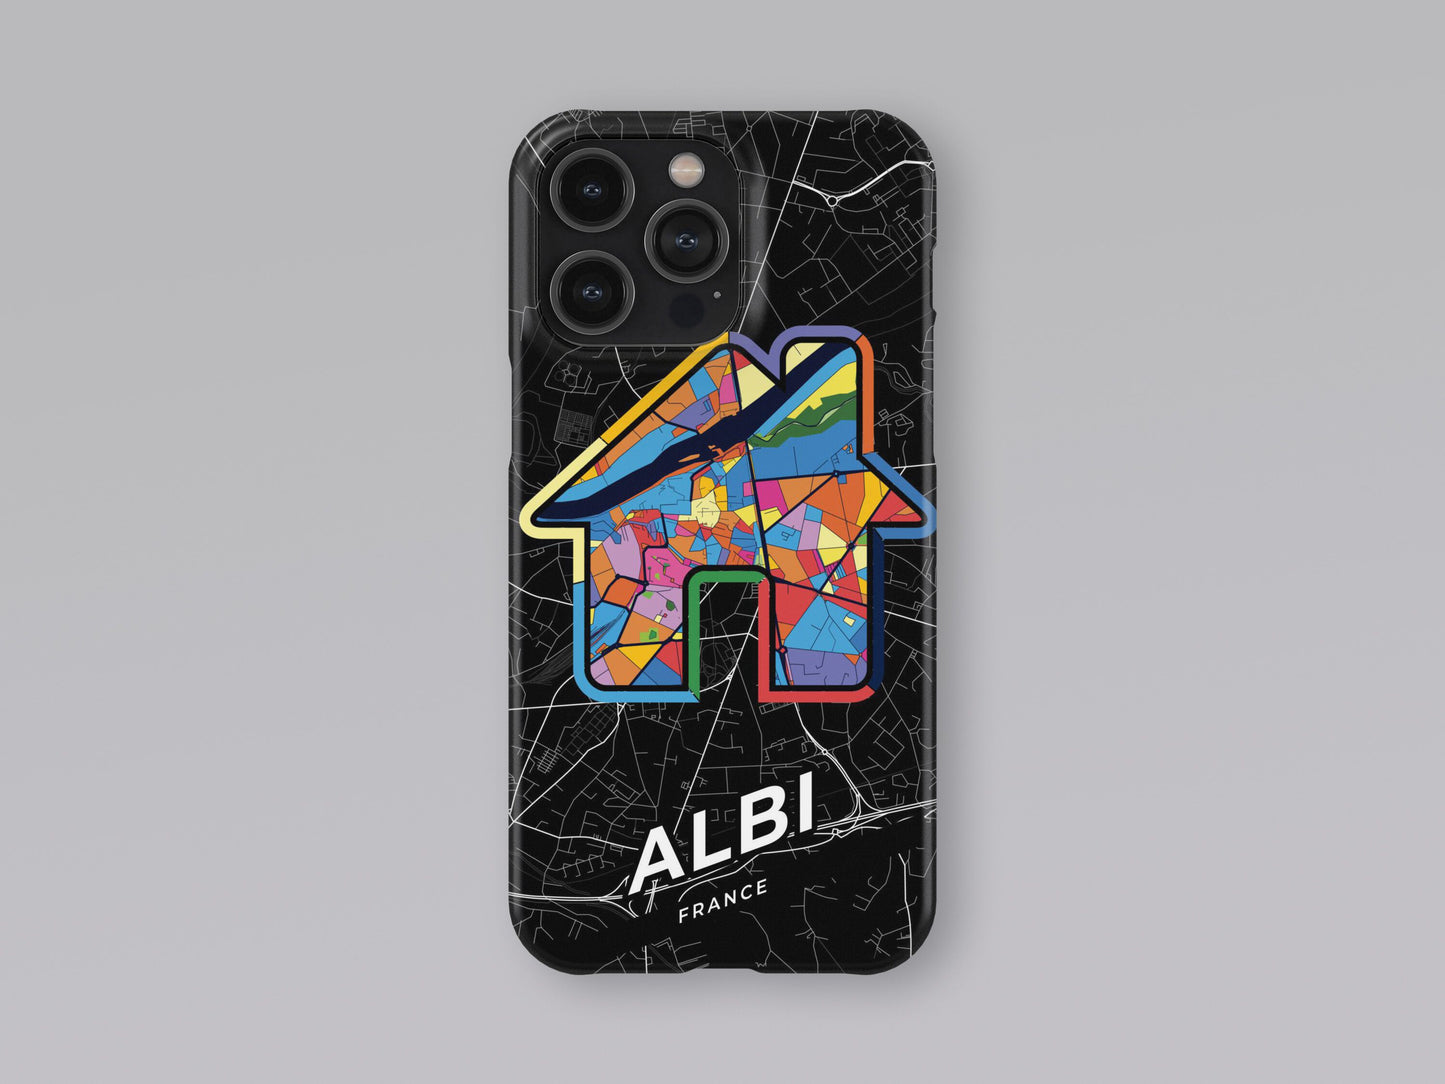 Albi France slim phone case with colorful icon. Birthday, wedding or housewarming gift. Couple match cases. 3